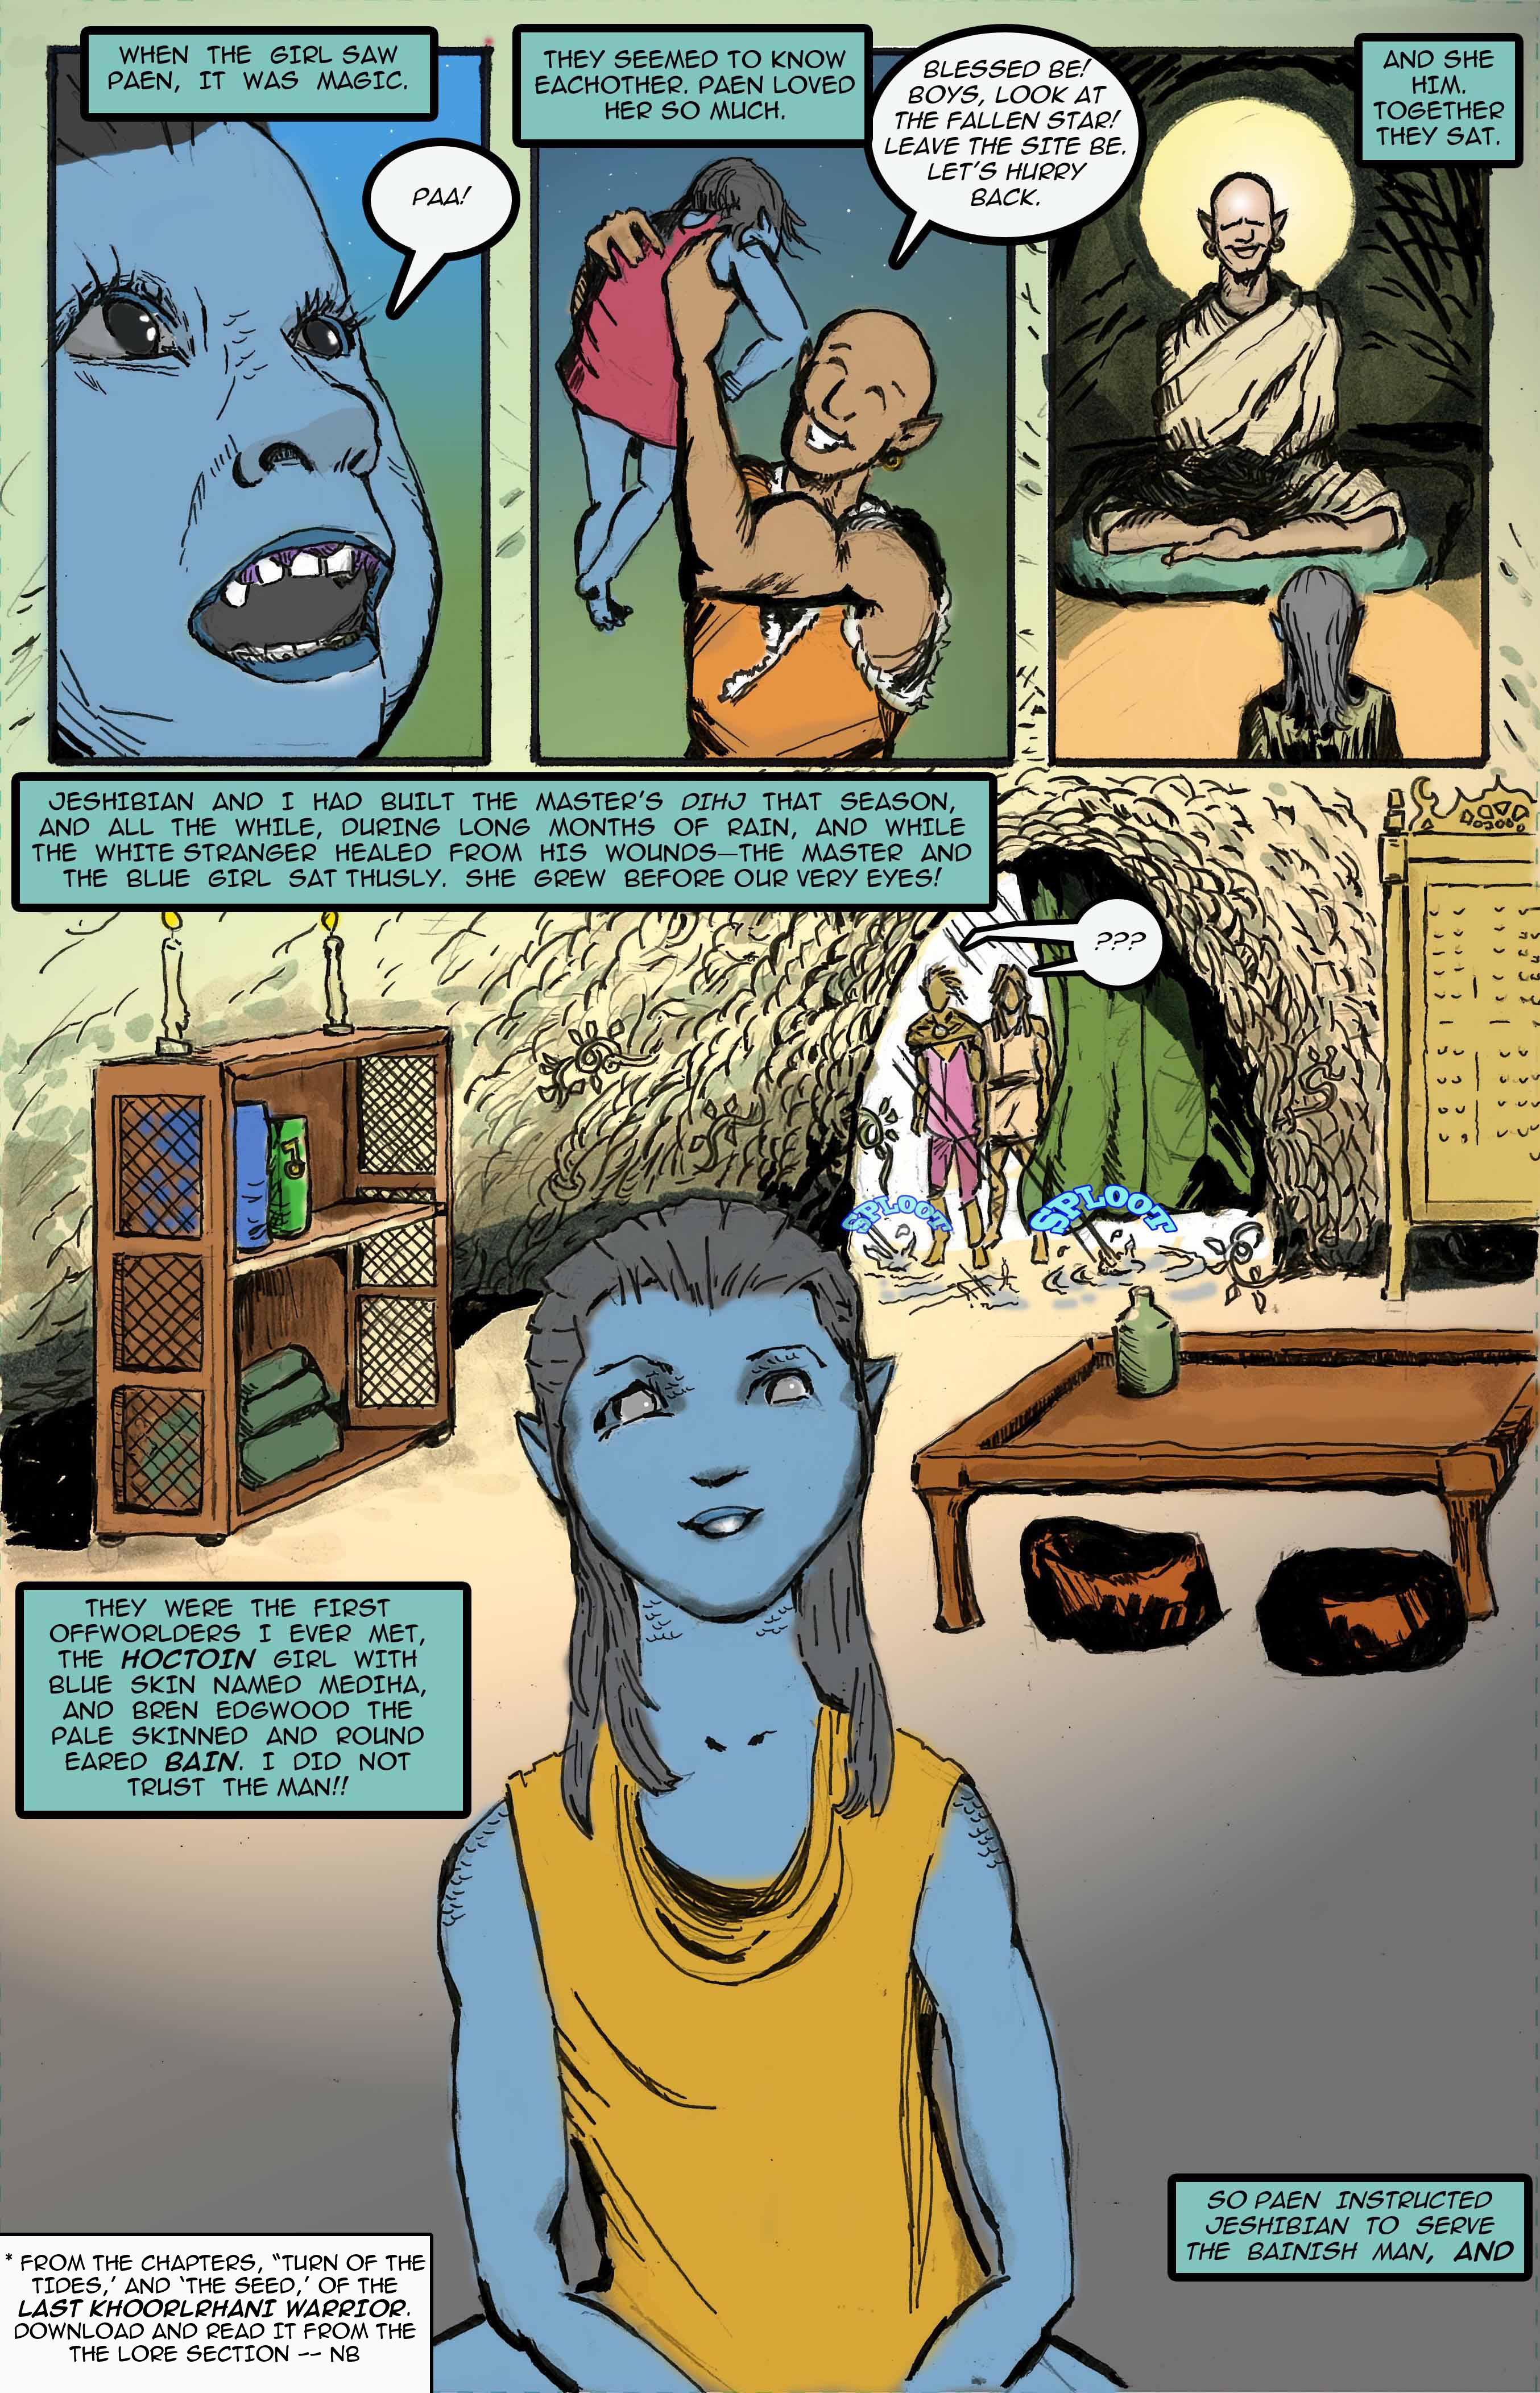 Dreamers of the Great One Land (page 25)